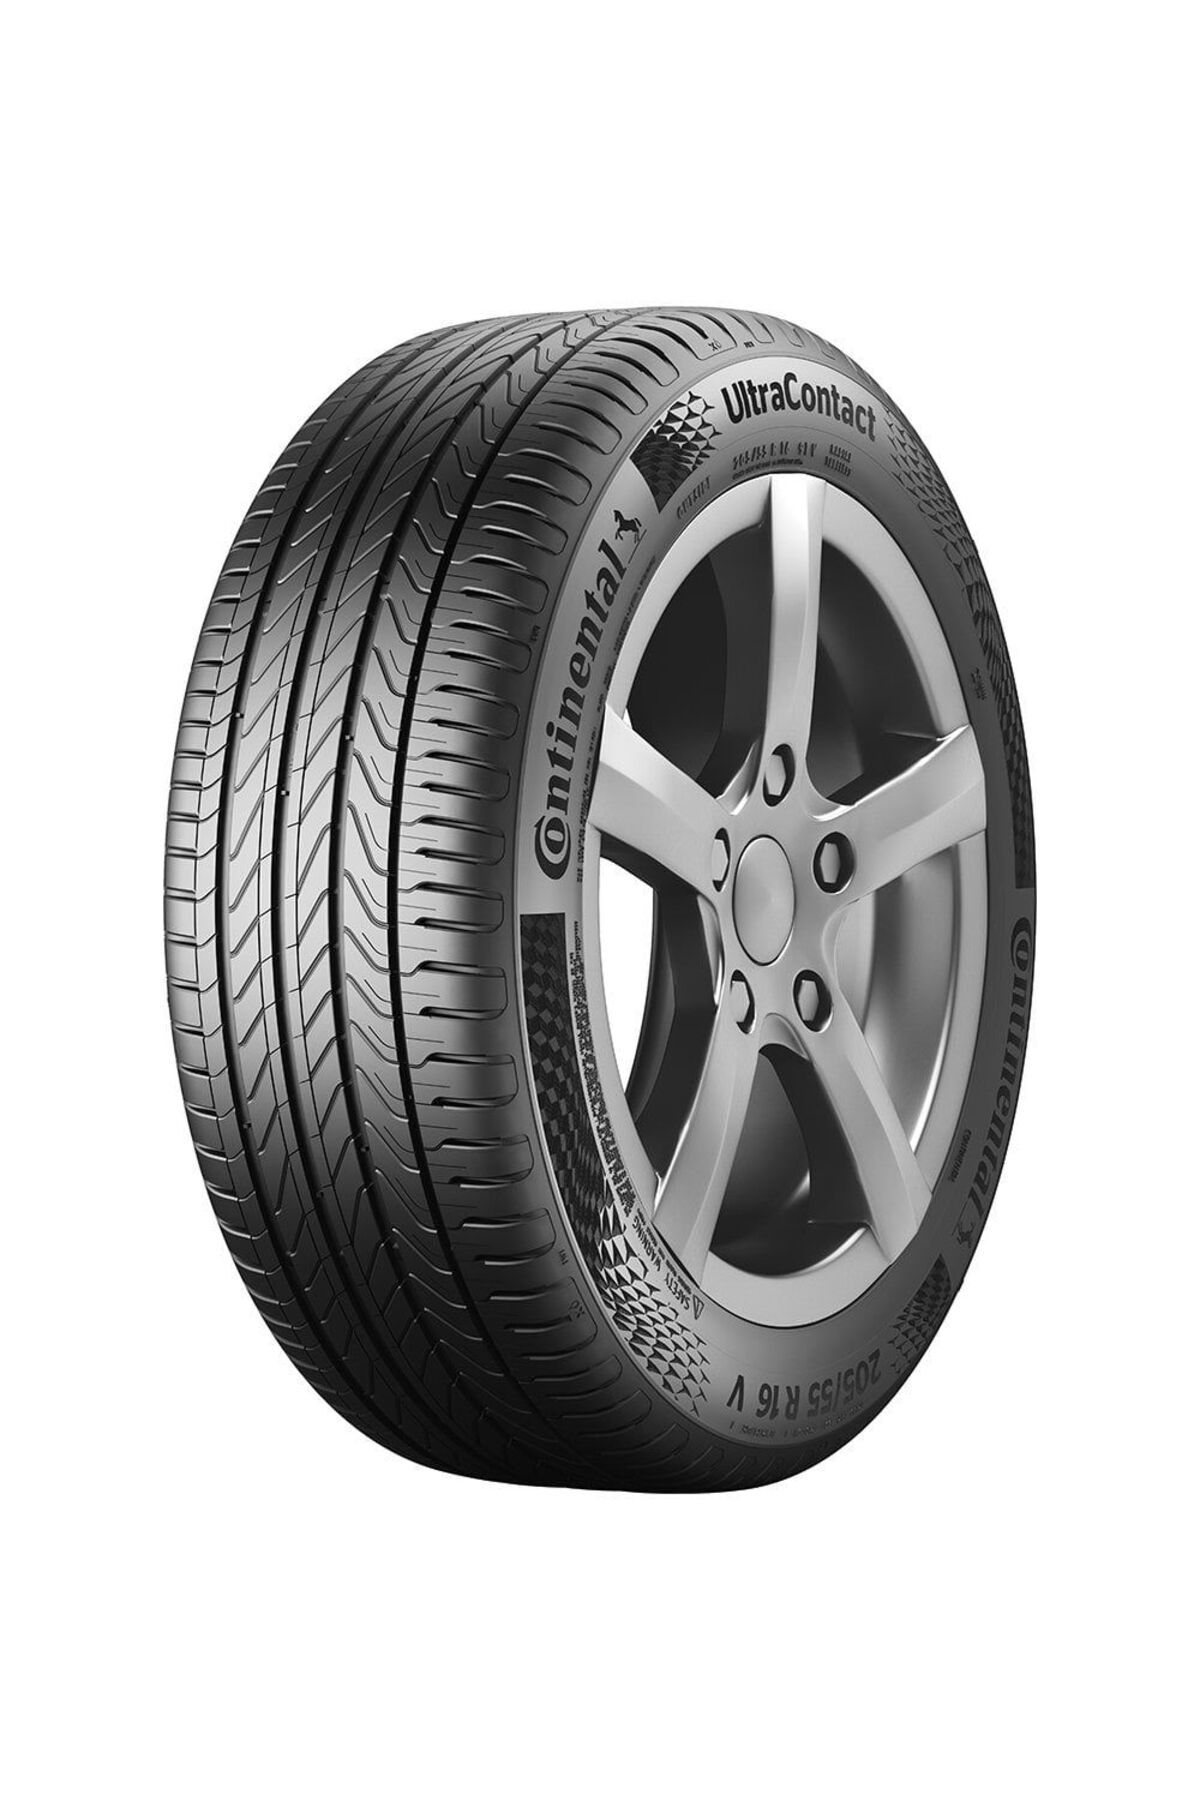 Continental 185/60r15 84h Ultracontact Conti?nental